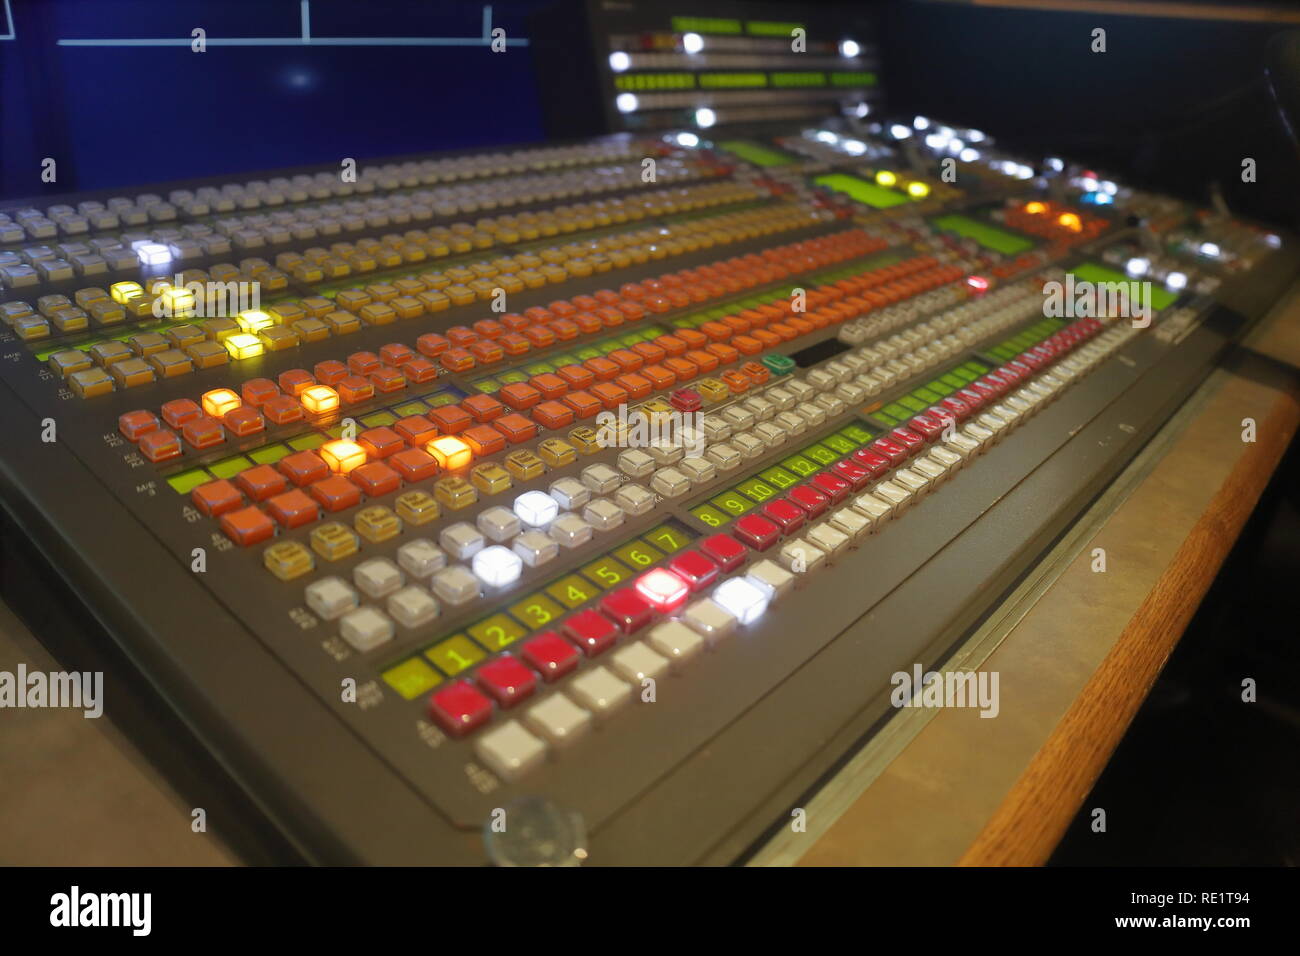 Broadcast production video switcher Stock Photo